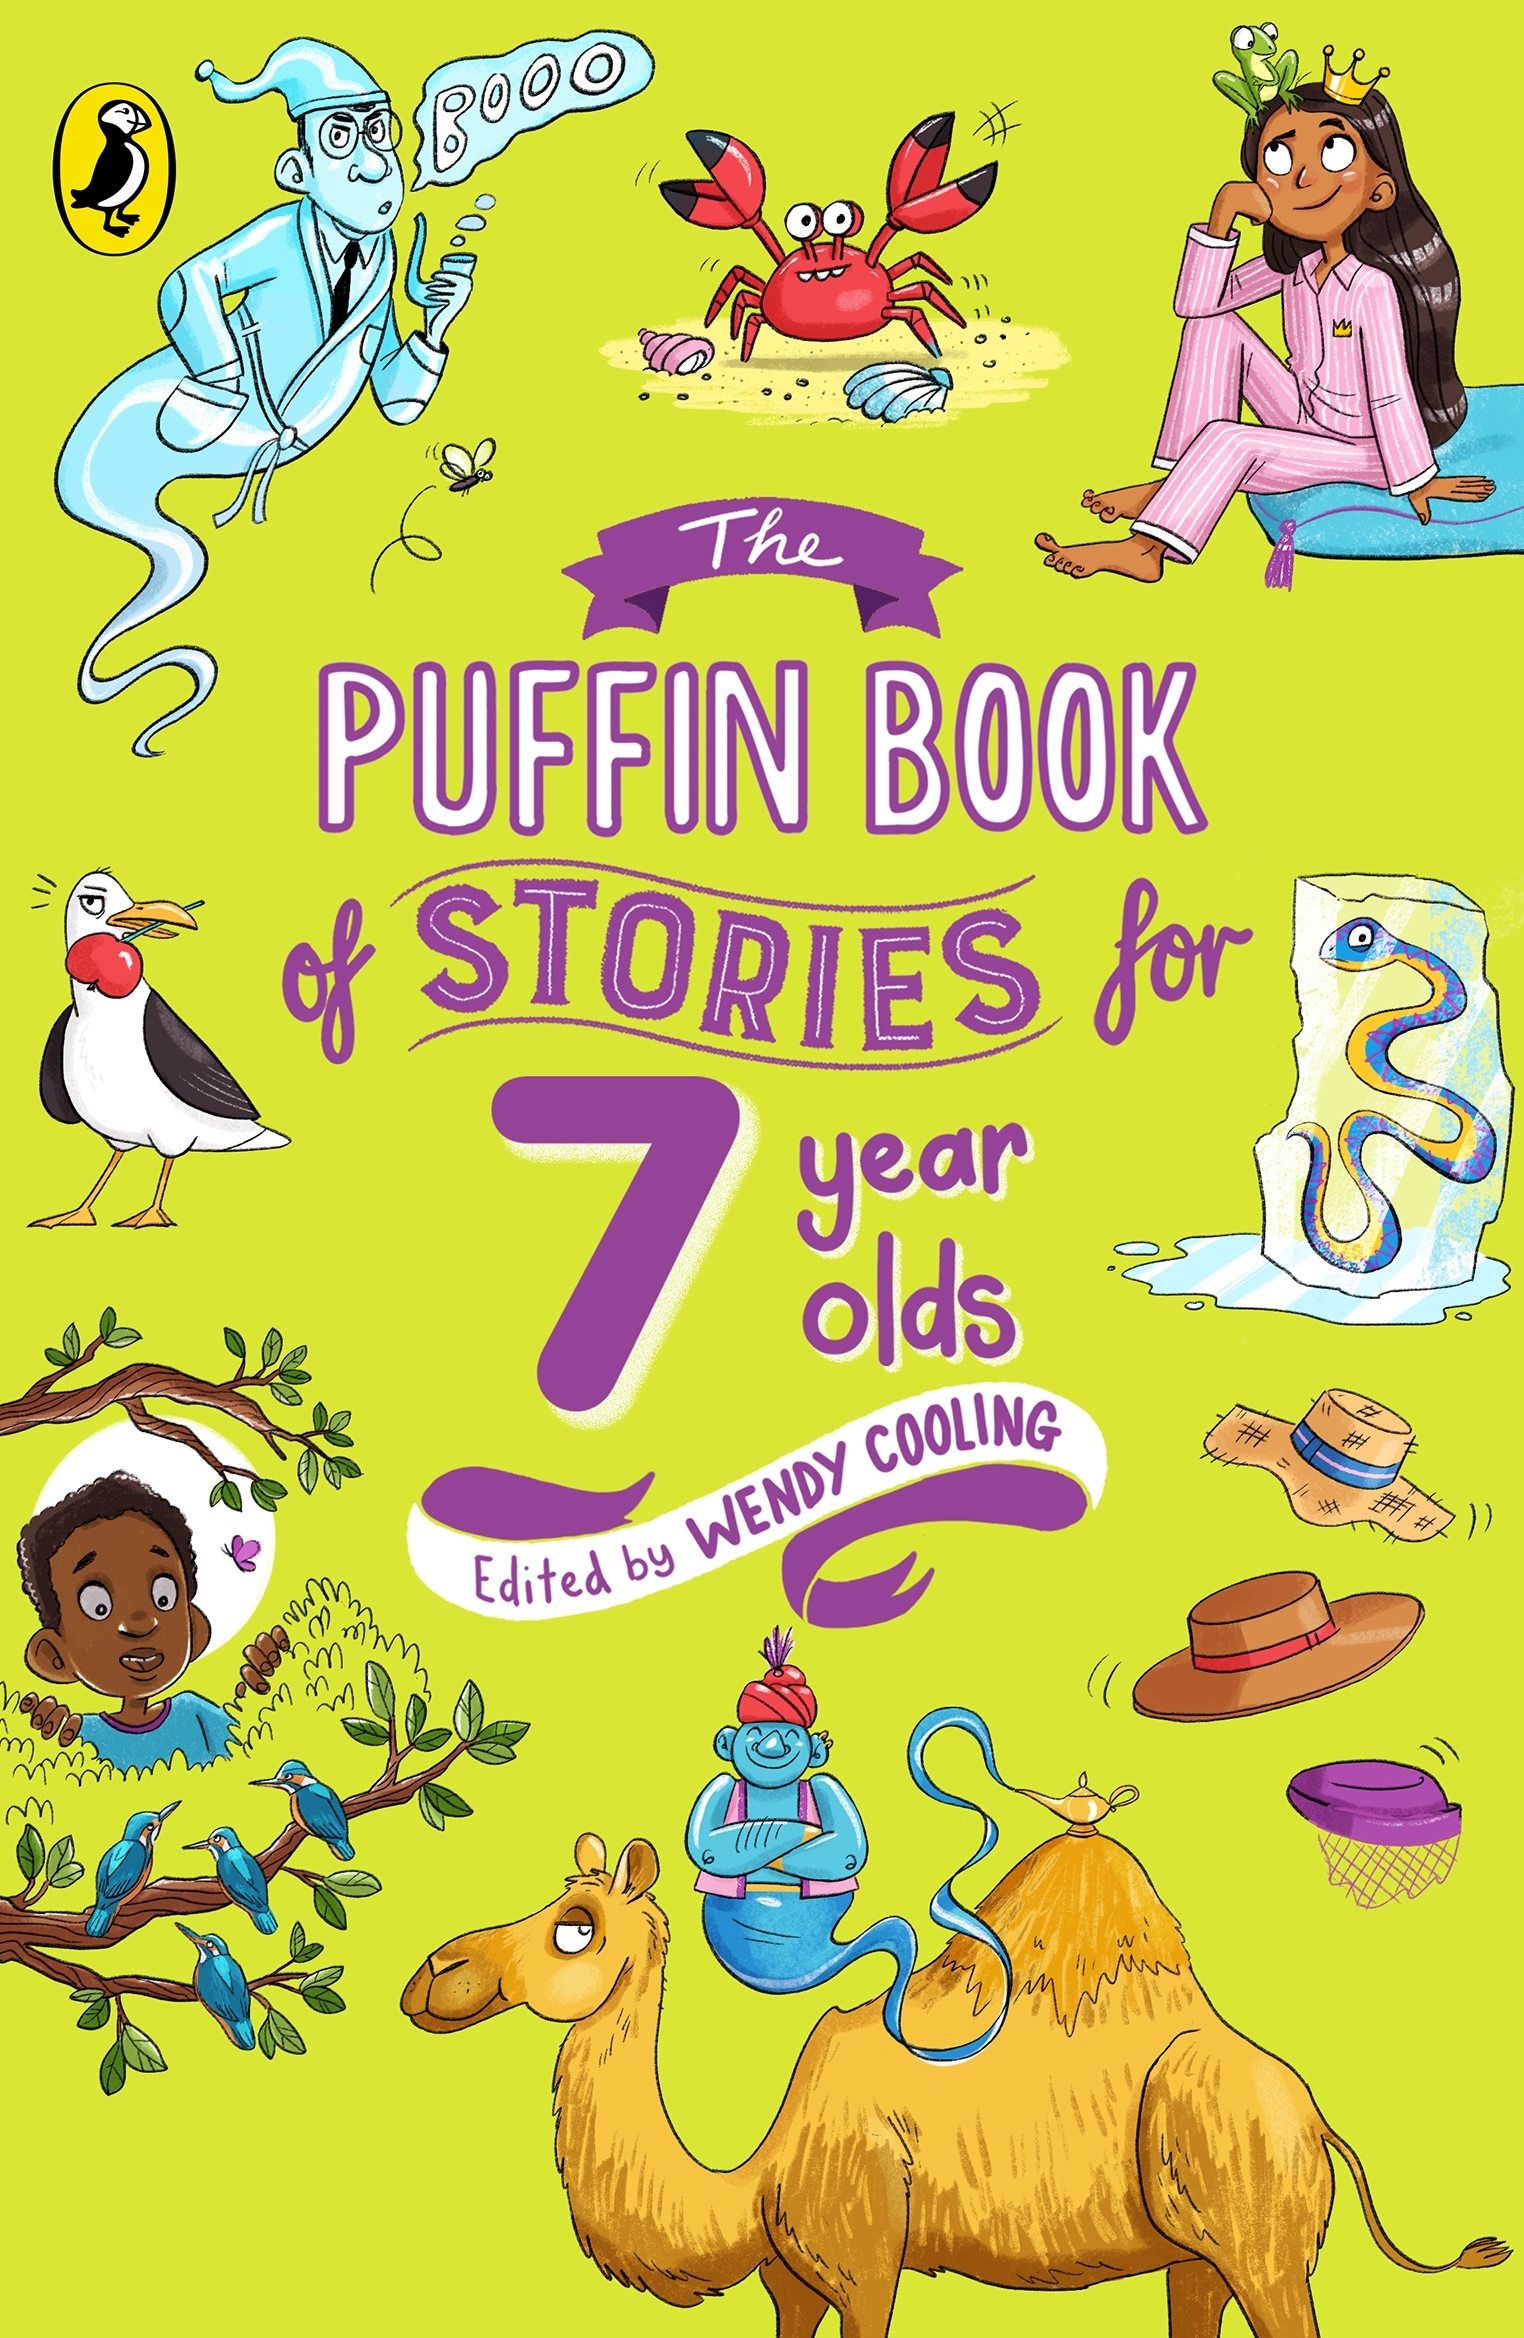 The Puffin Book of Stories for Seven-year-olds by Wendy Cooling